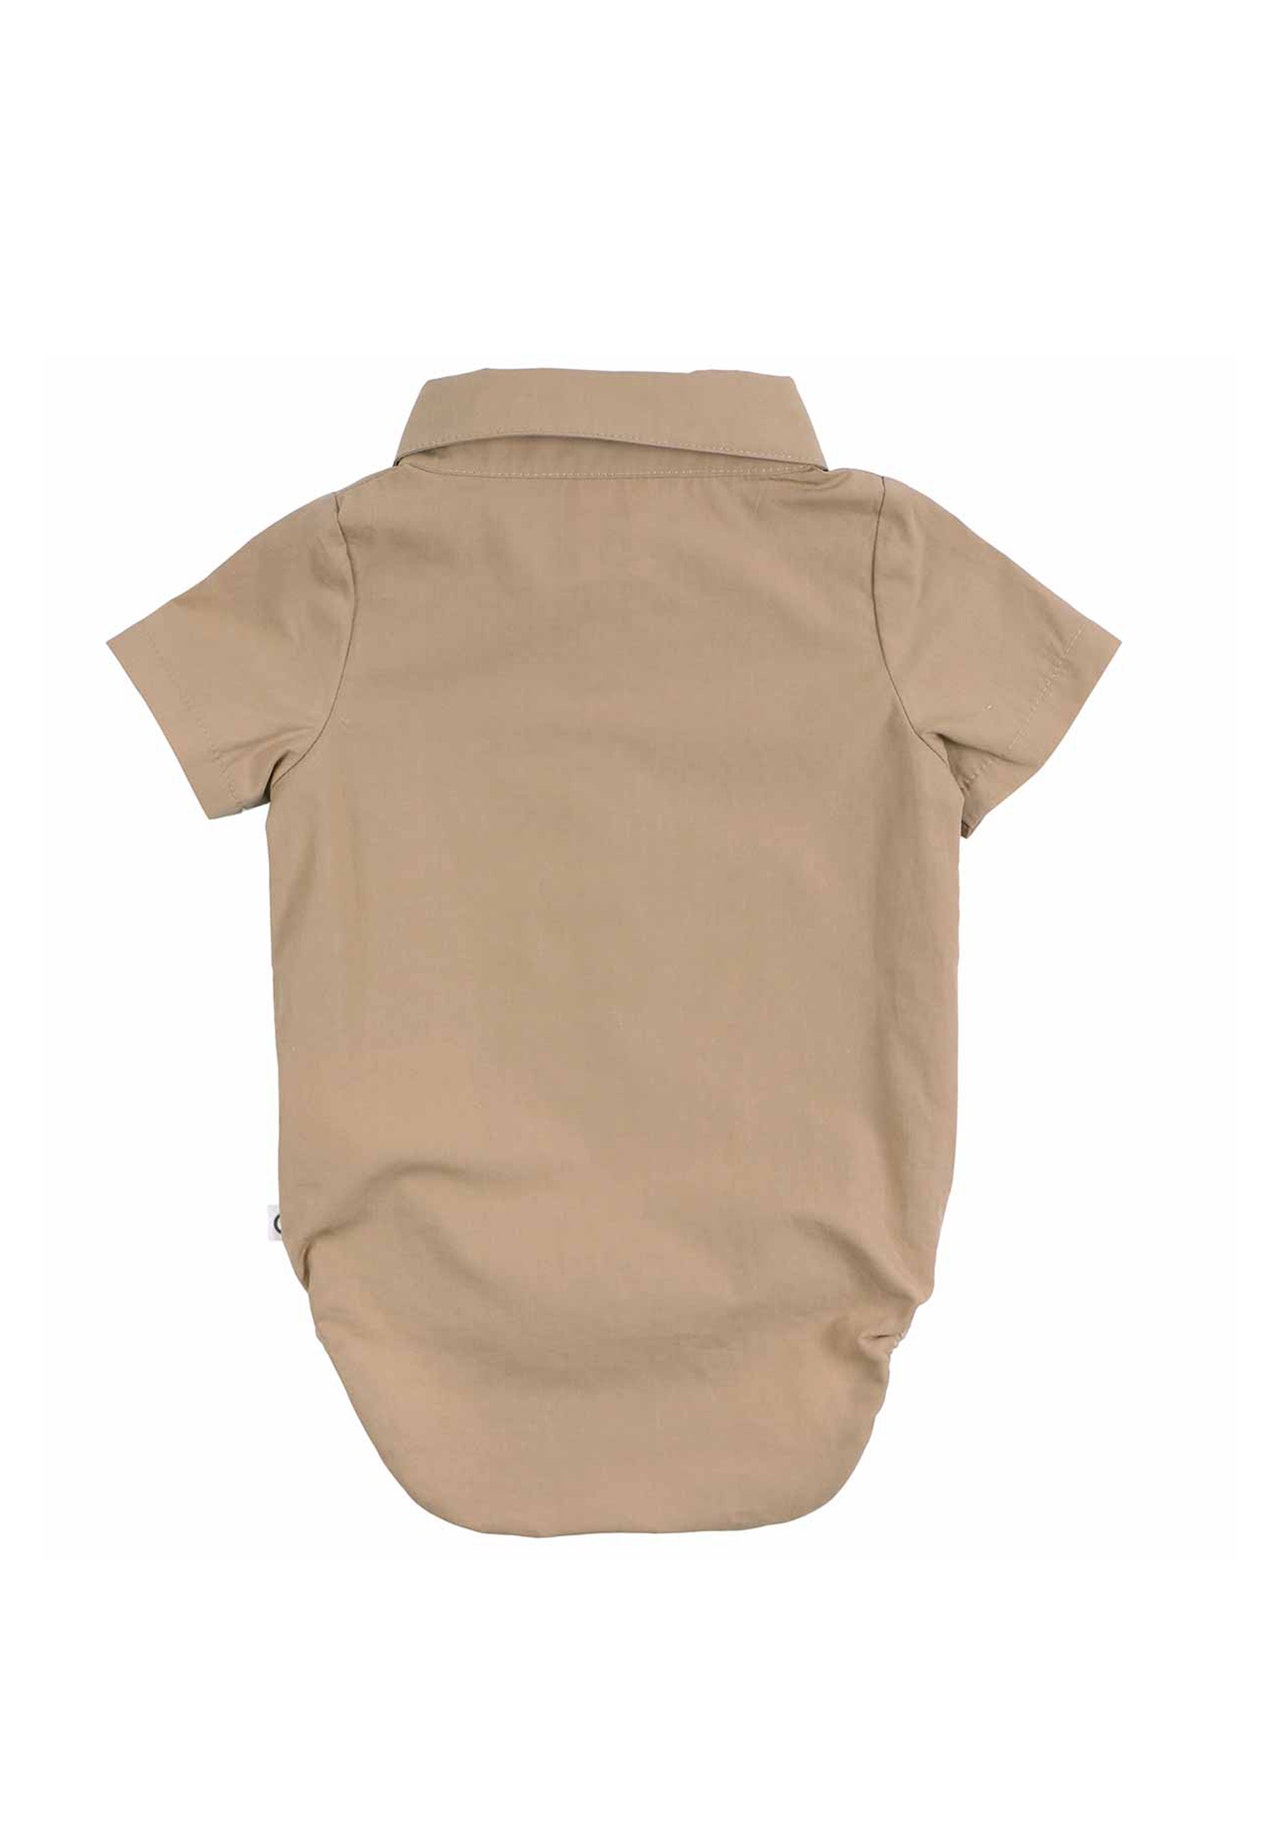 MAMA.LICIOUS Baby-romper -Seed - 1581022000